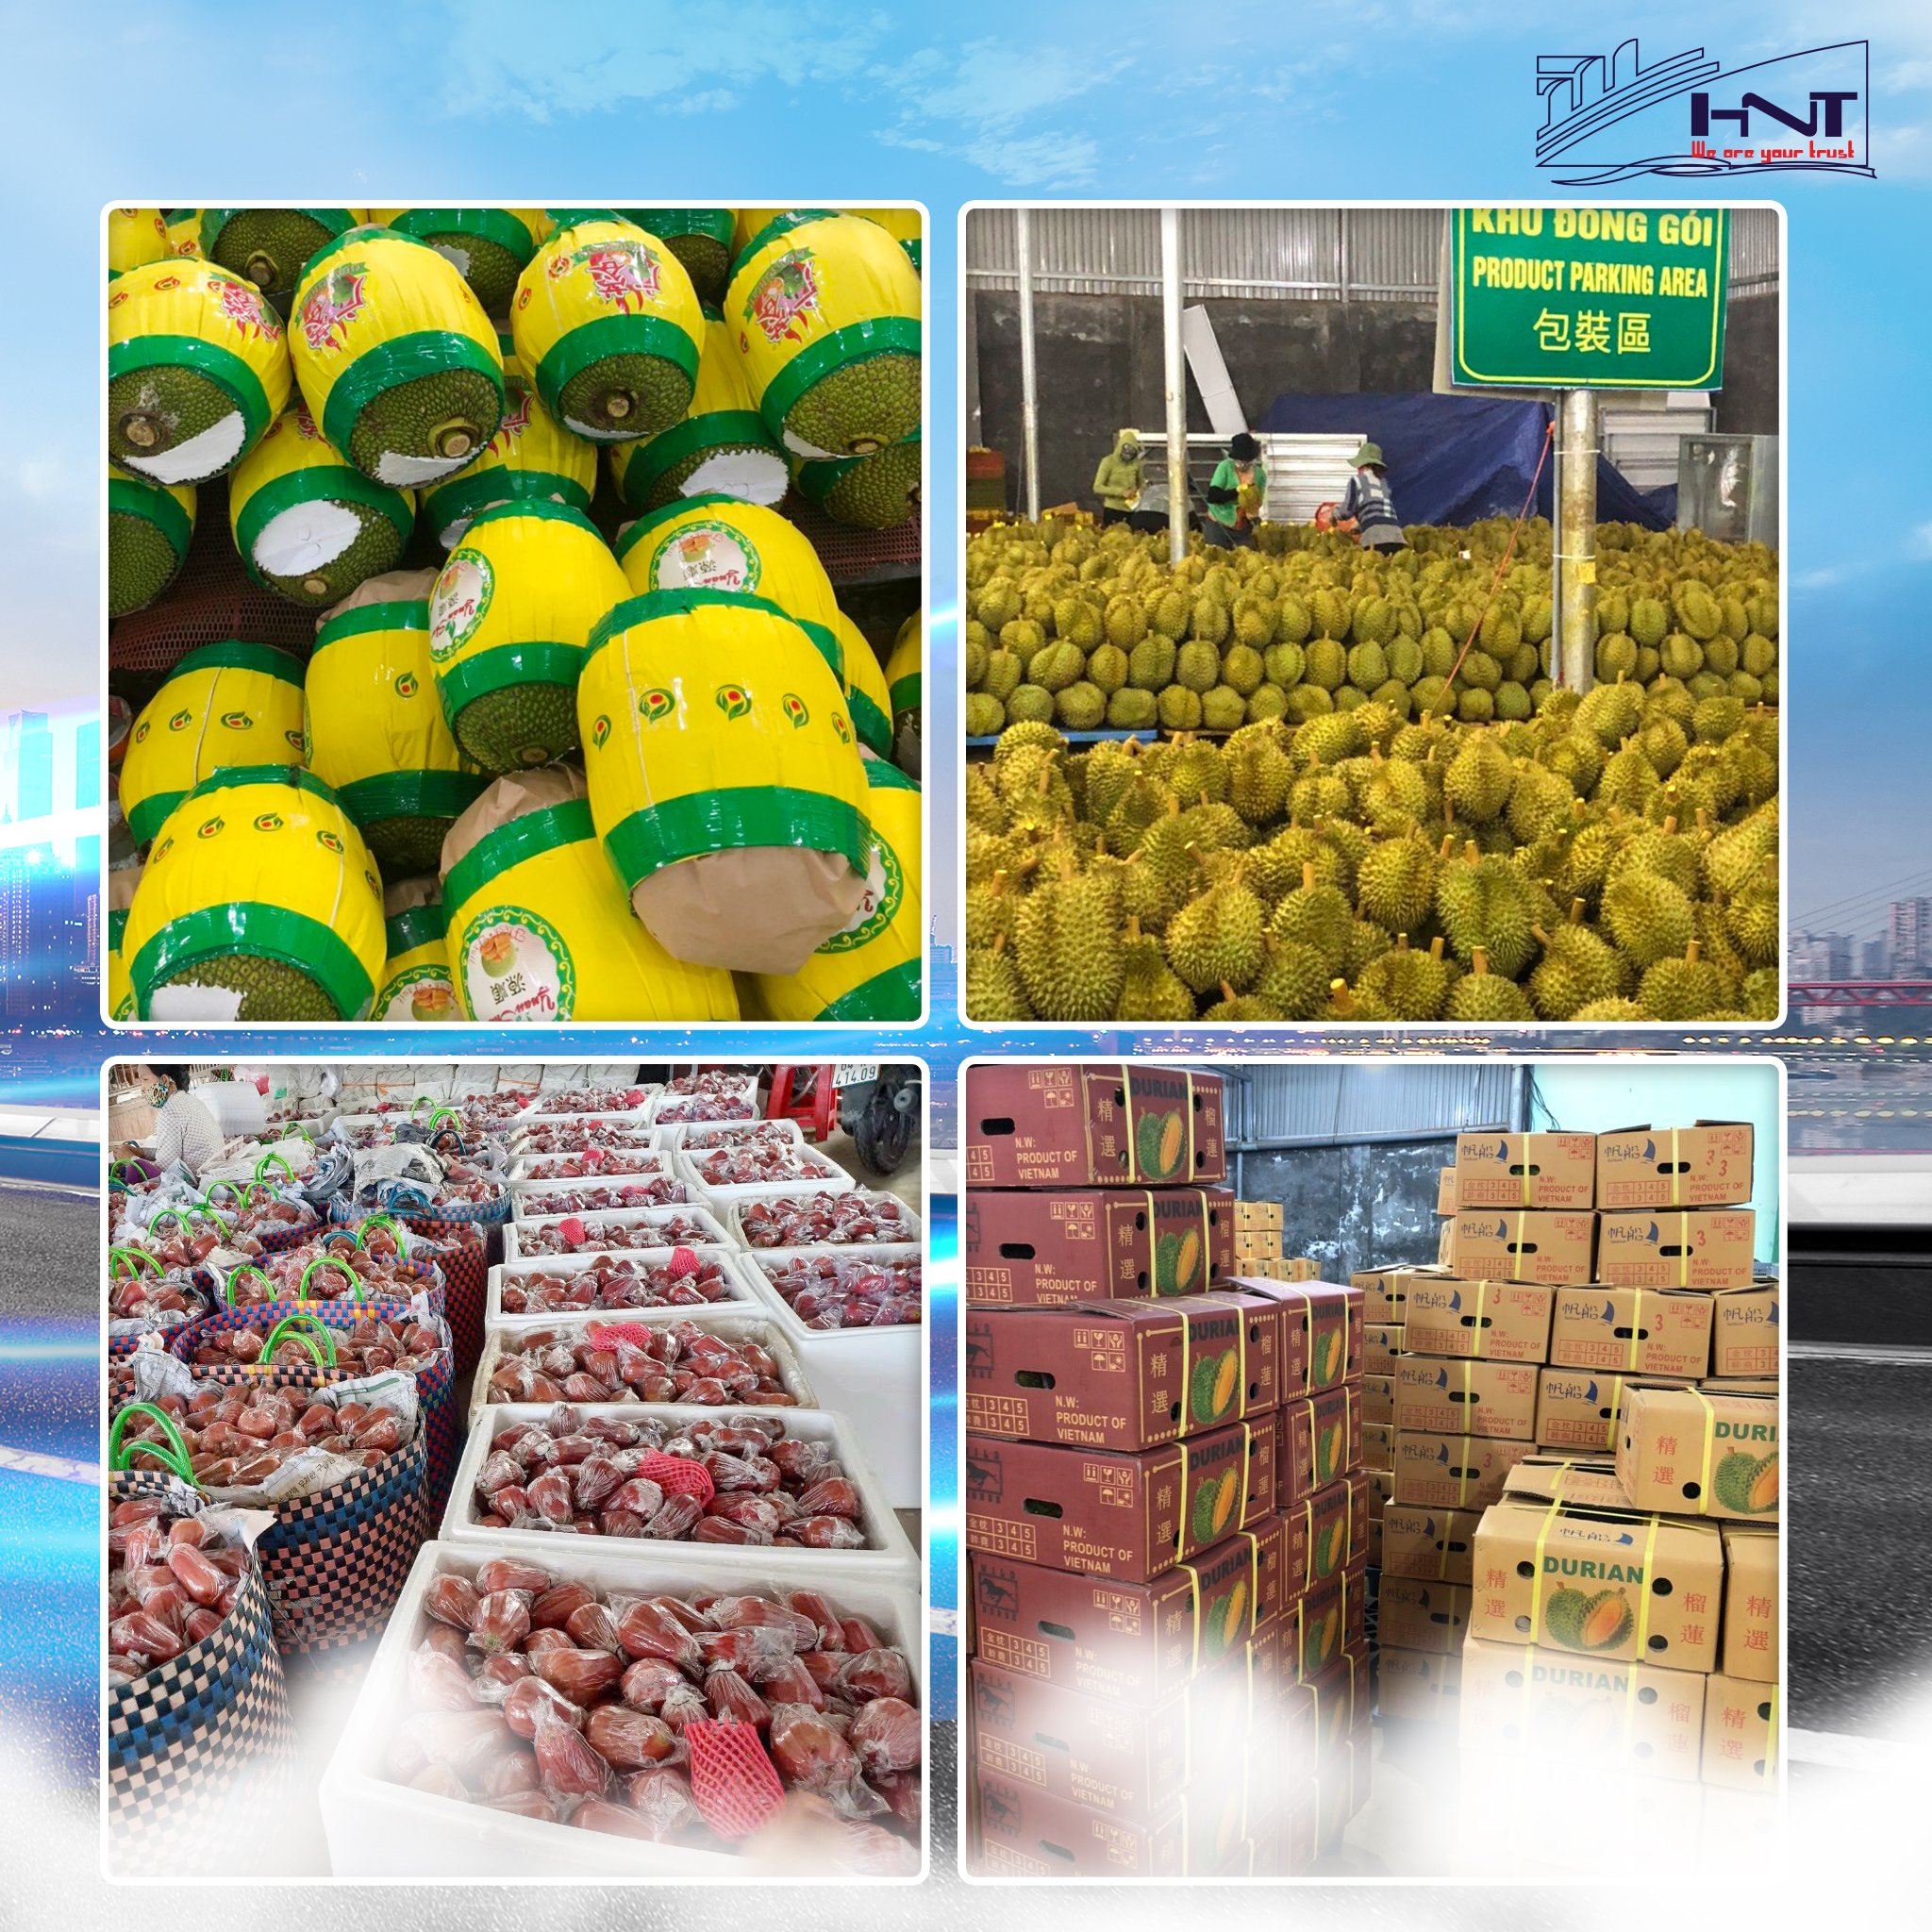 Definition of Viet Nam of agricultural products is what